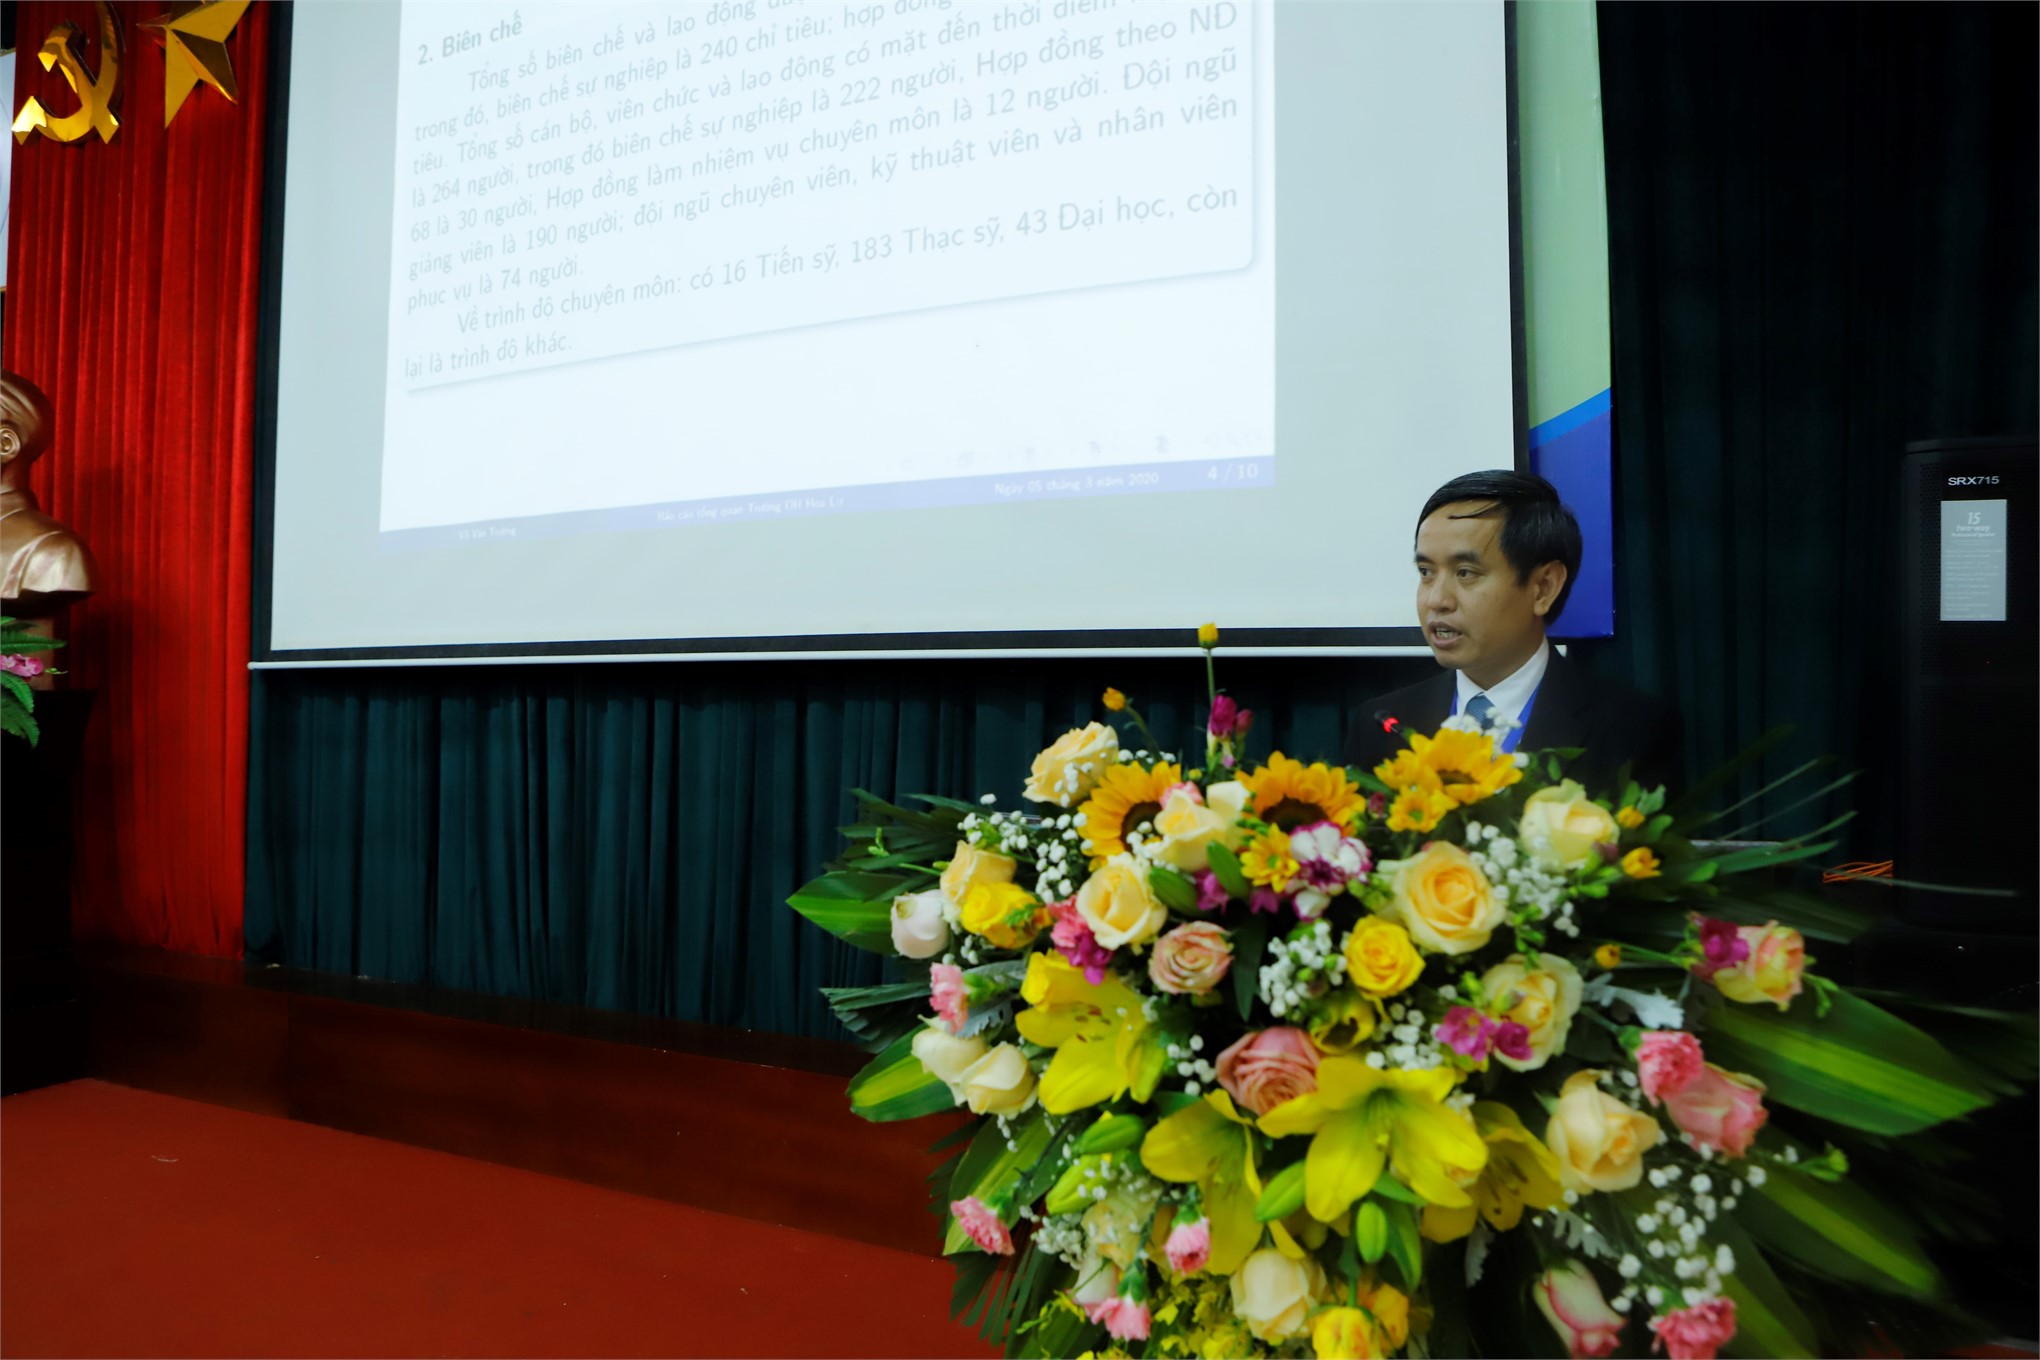 LAUNCHING CEREMONY OF THE OFFICIAL SURVEY ON THE EDUCATION QUALITY EVALUATION OF HOA LU UNIVERSITY